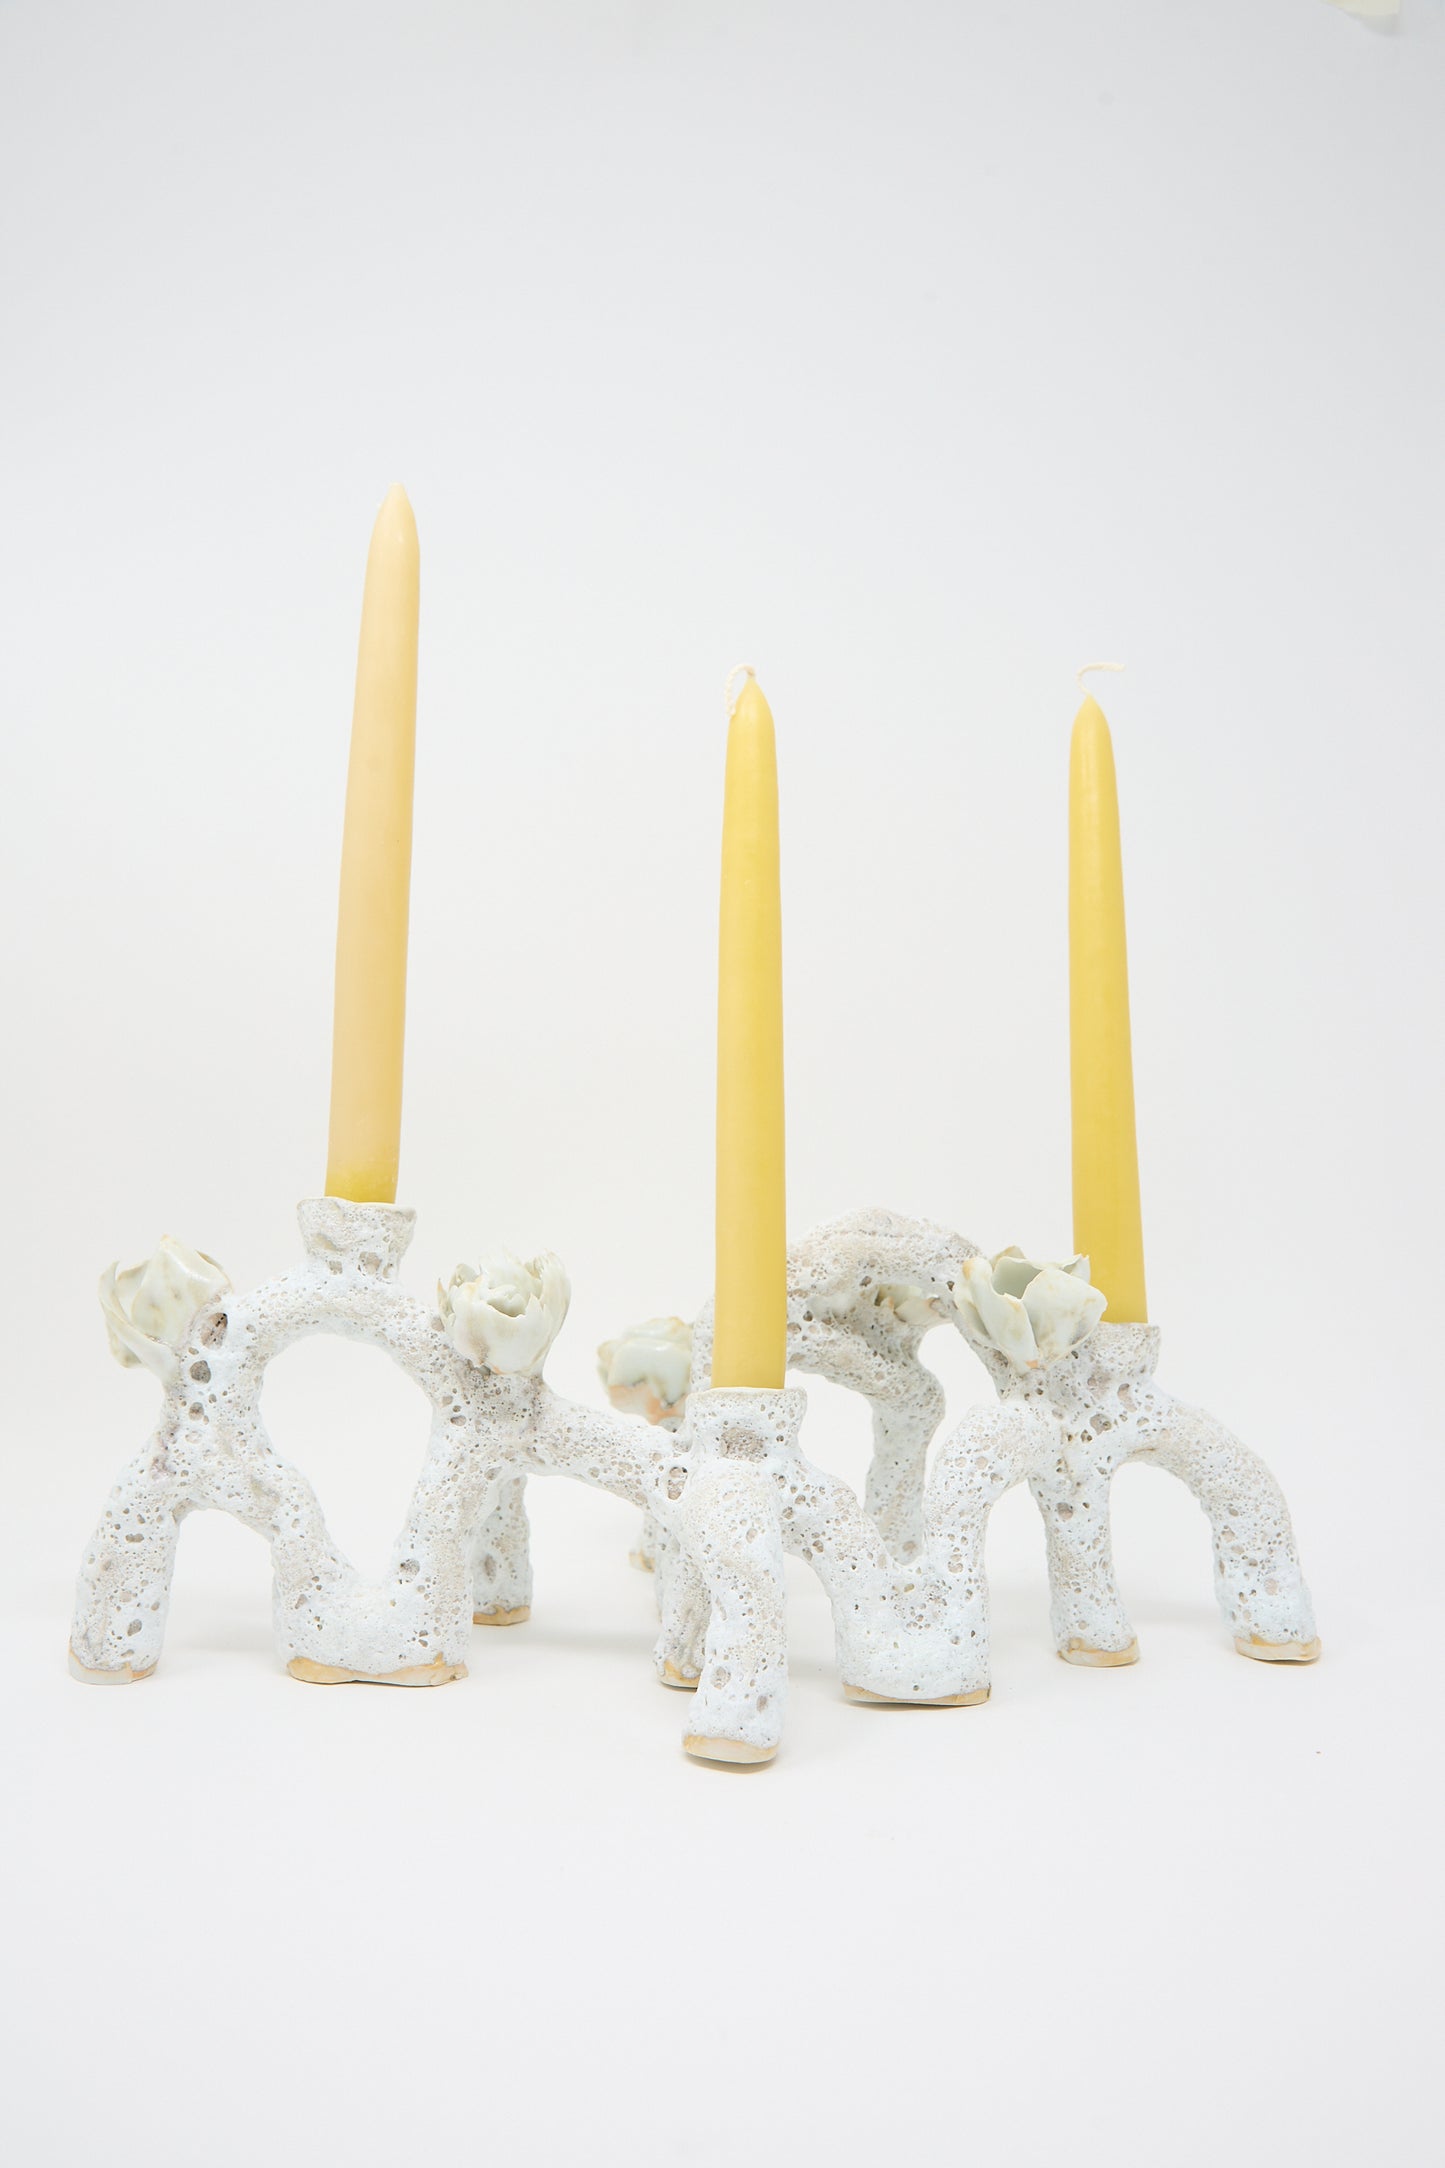 A hand-built, ceramic candle holder with a speckled, arch-like design elegantly cradles three tall, yellow candles on a plain white background is the Blooming Arches Candle Holder by Dear You.